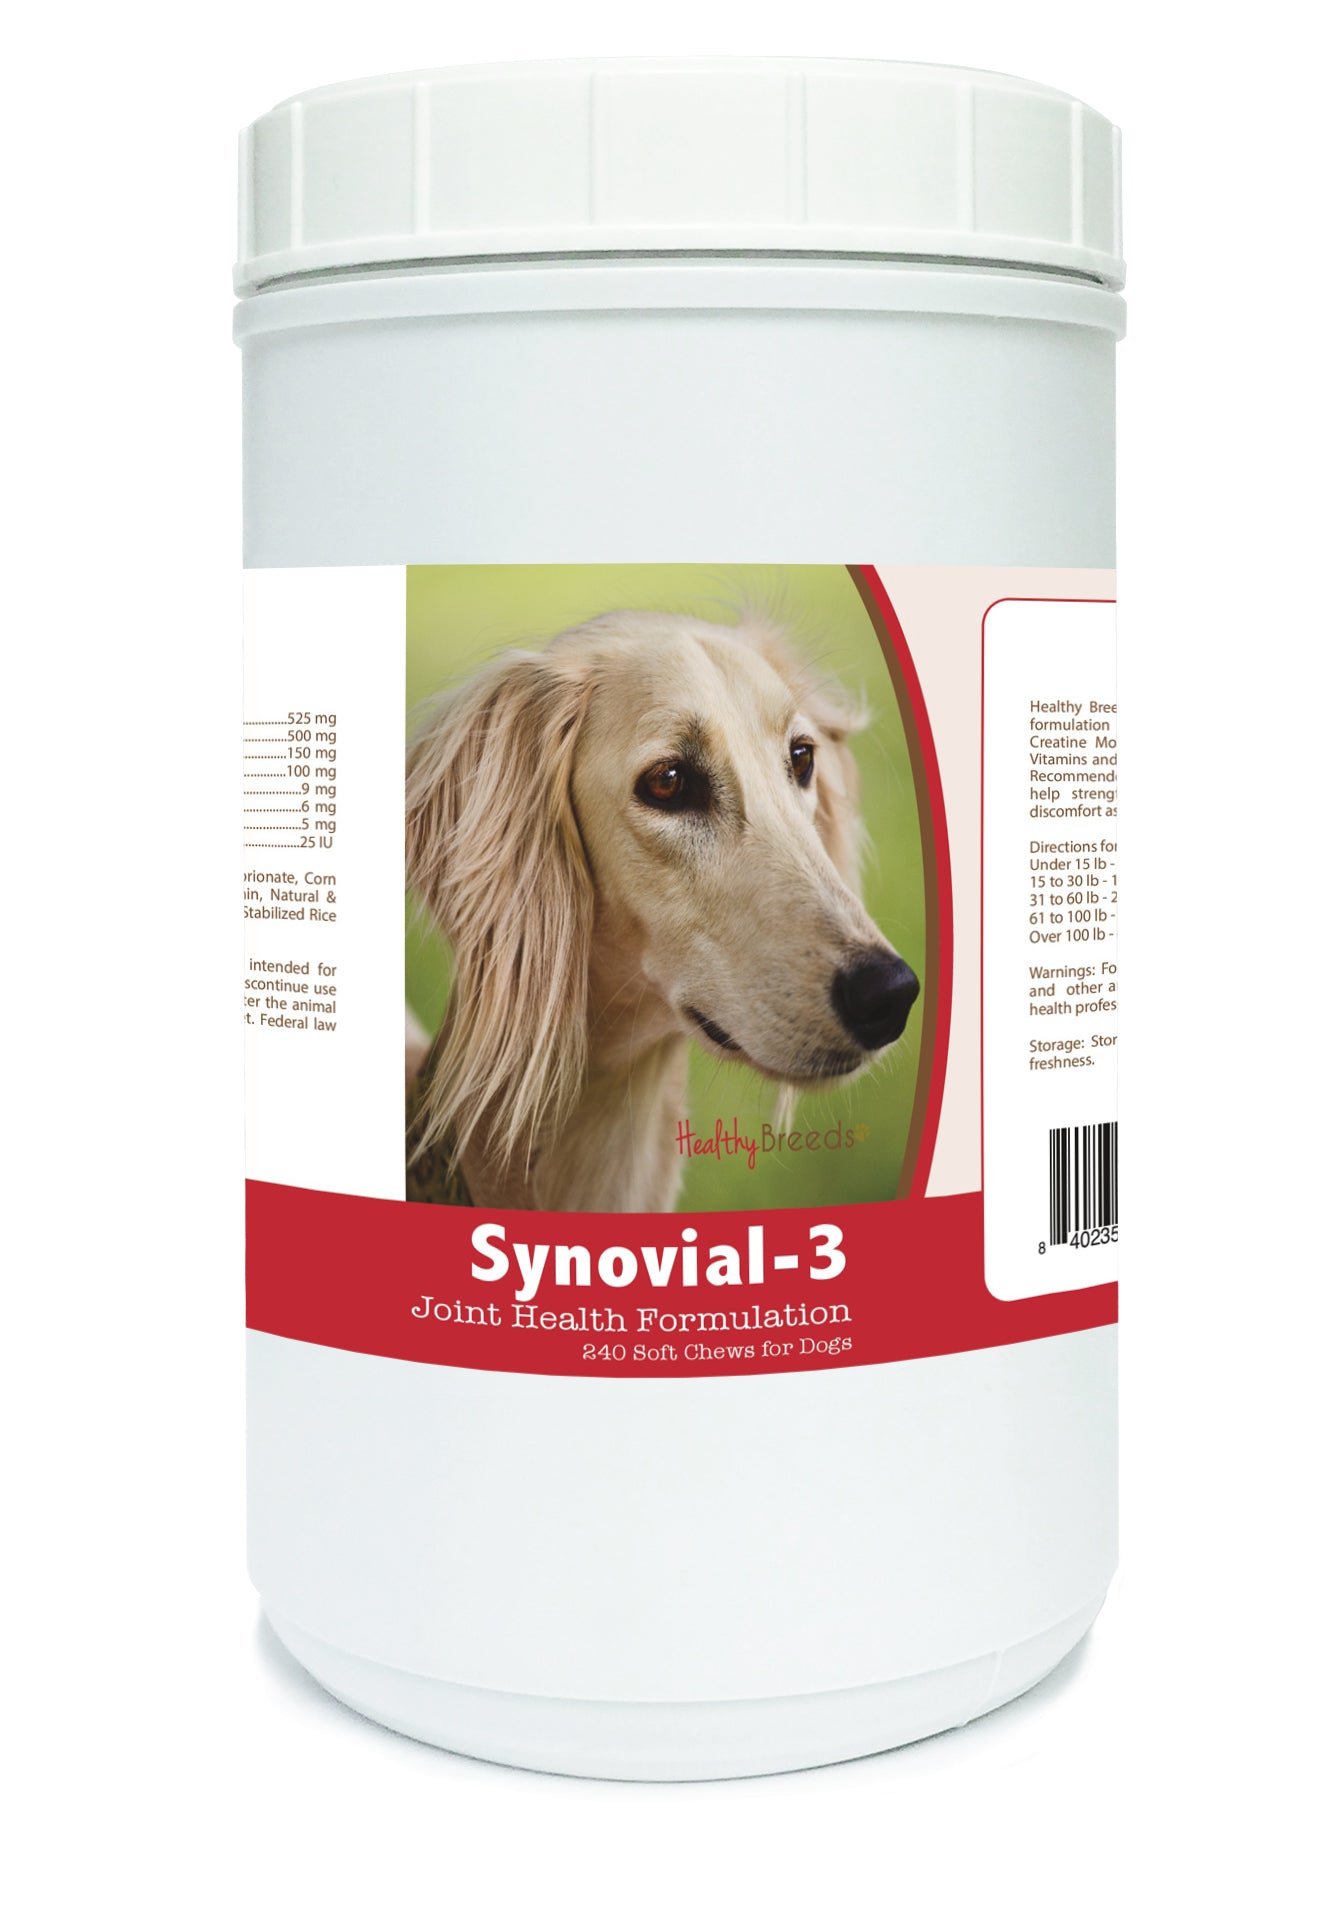 Saluki Synovial-3 Joint Health Formulation Soft Chews 240 Count